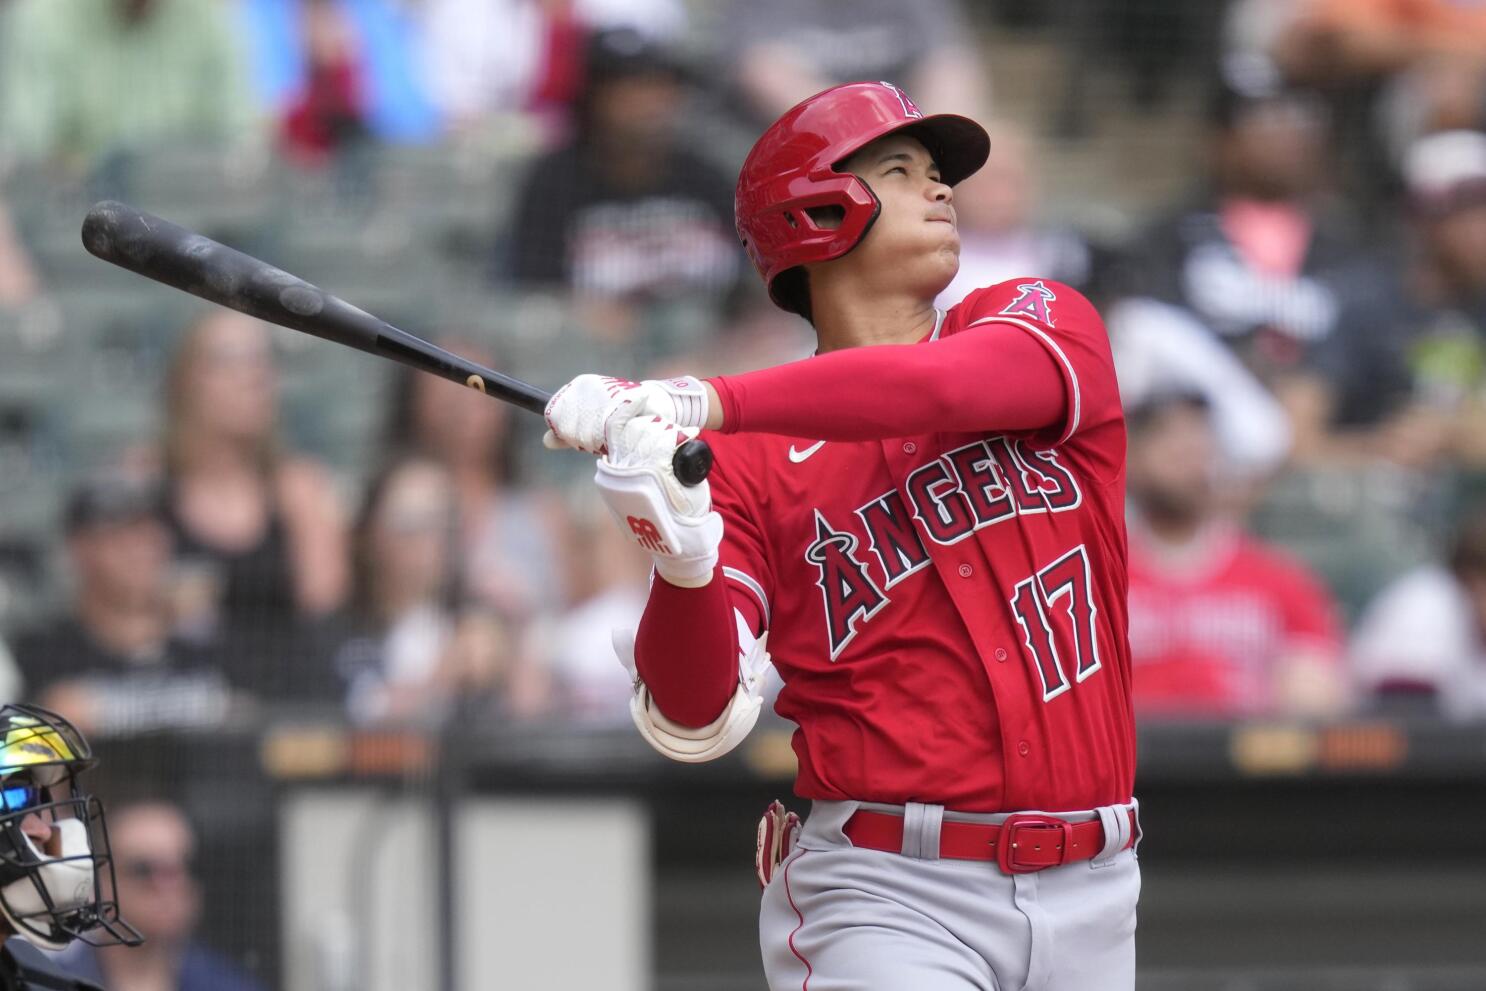 Shohei Ohtani's 40th homer puts him in rare group with Pablo